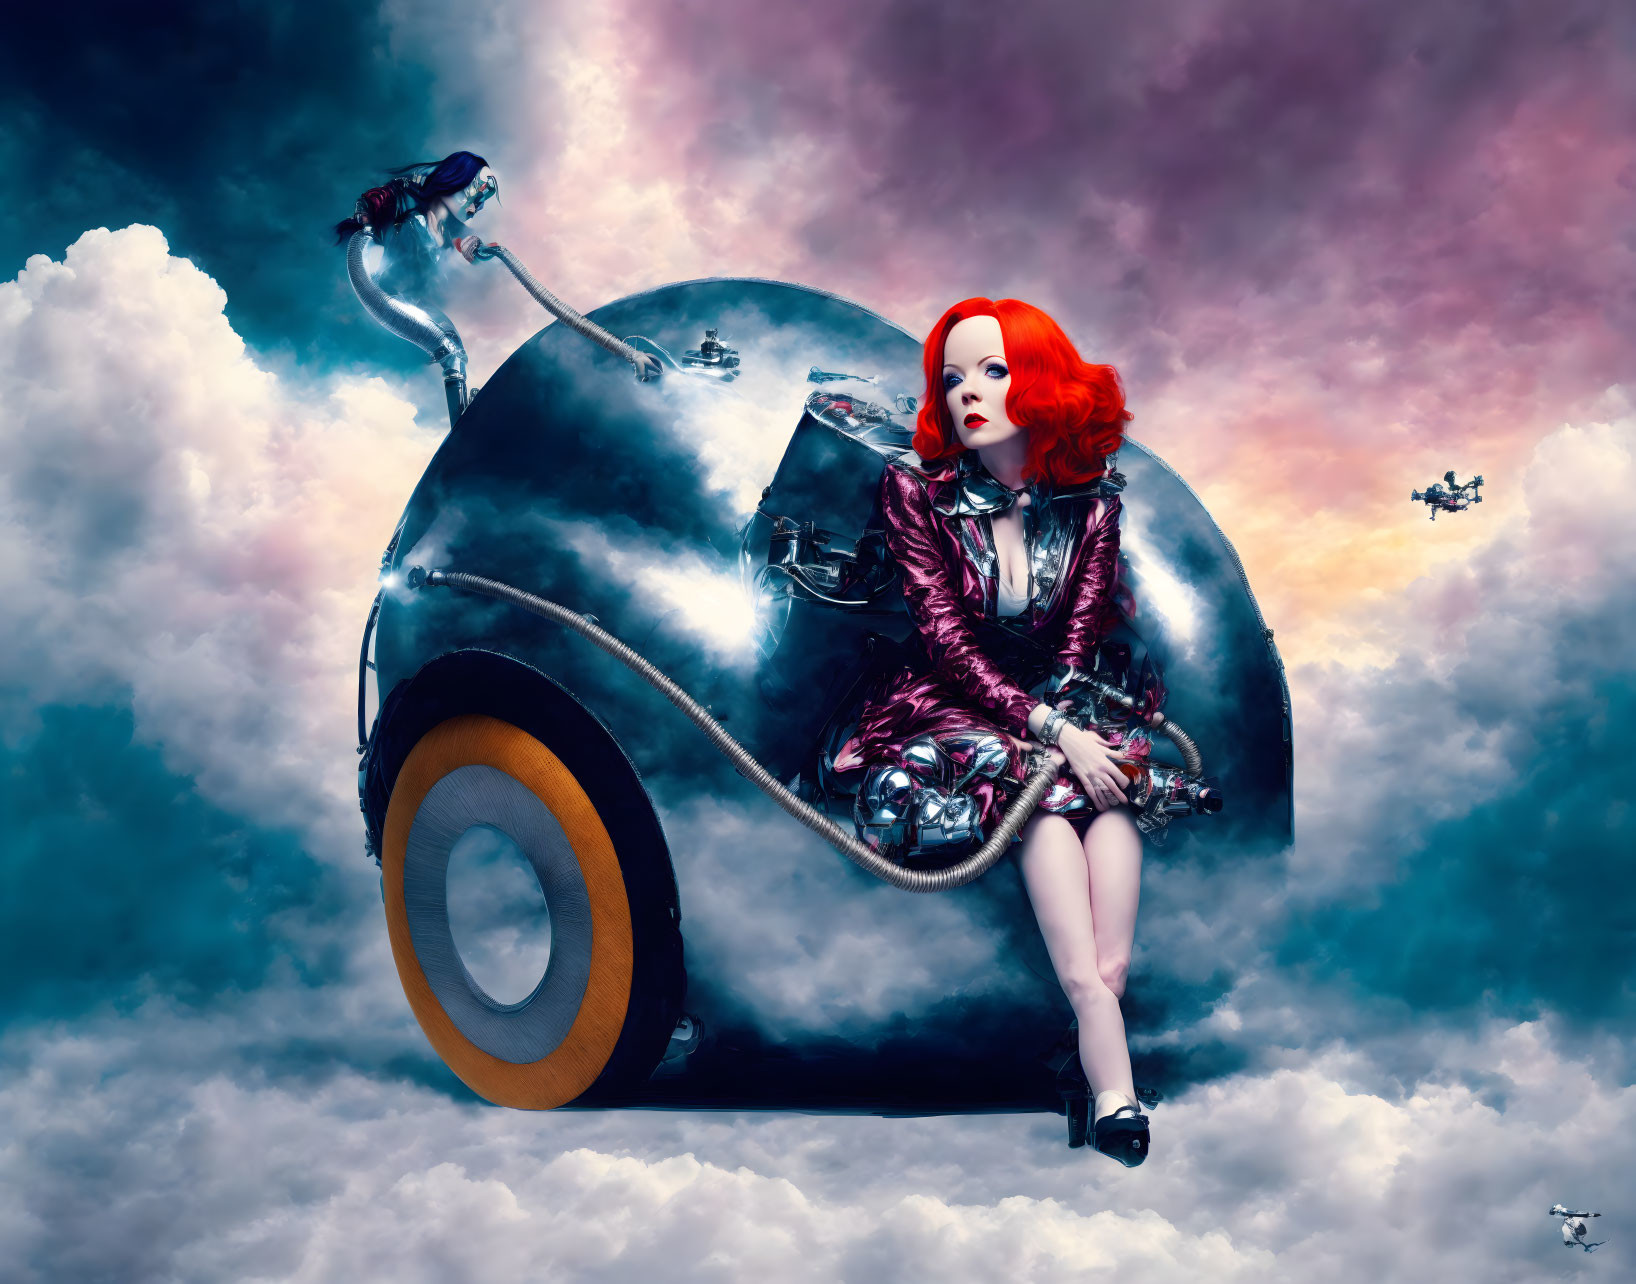 Red-haired woman in metallic dress on futuristic motorcycle under dreamy sky with floating ships